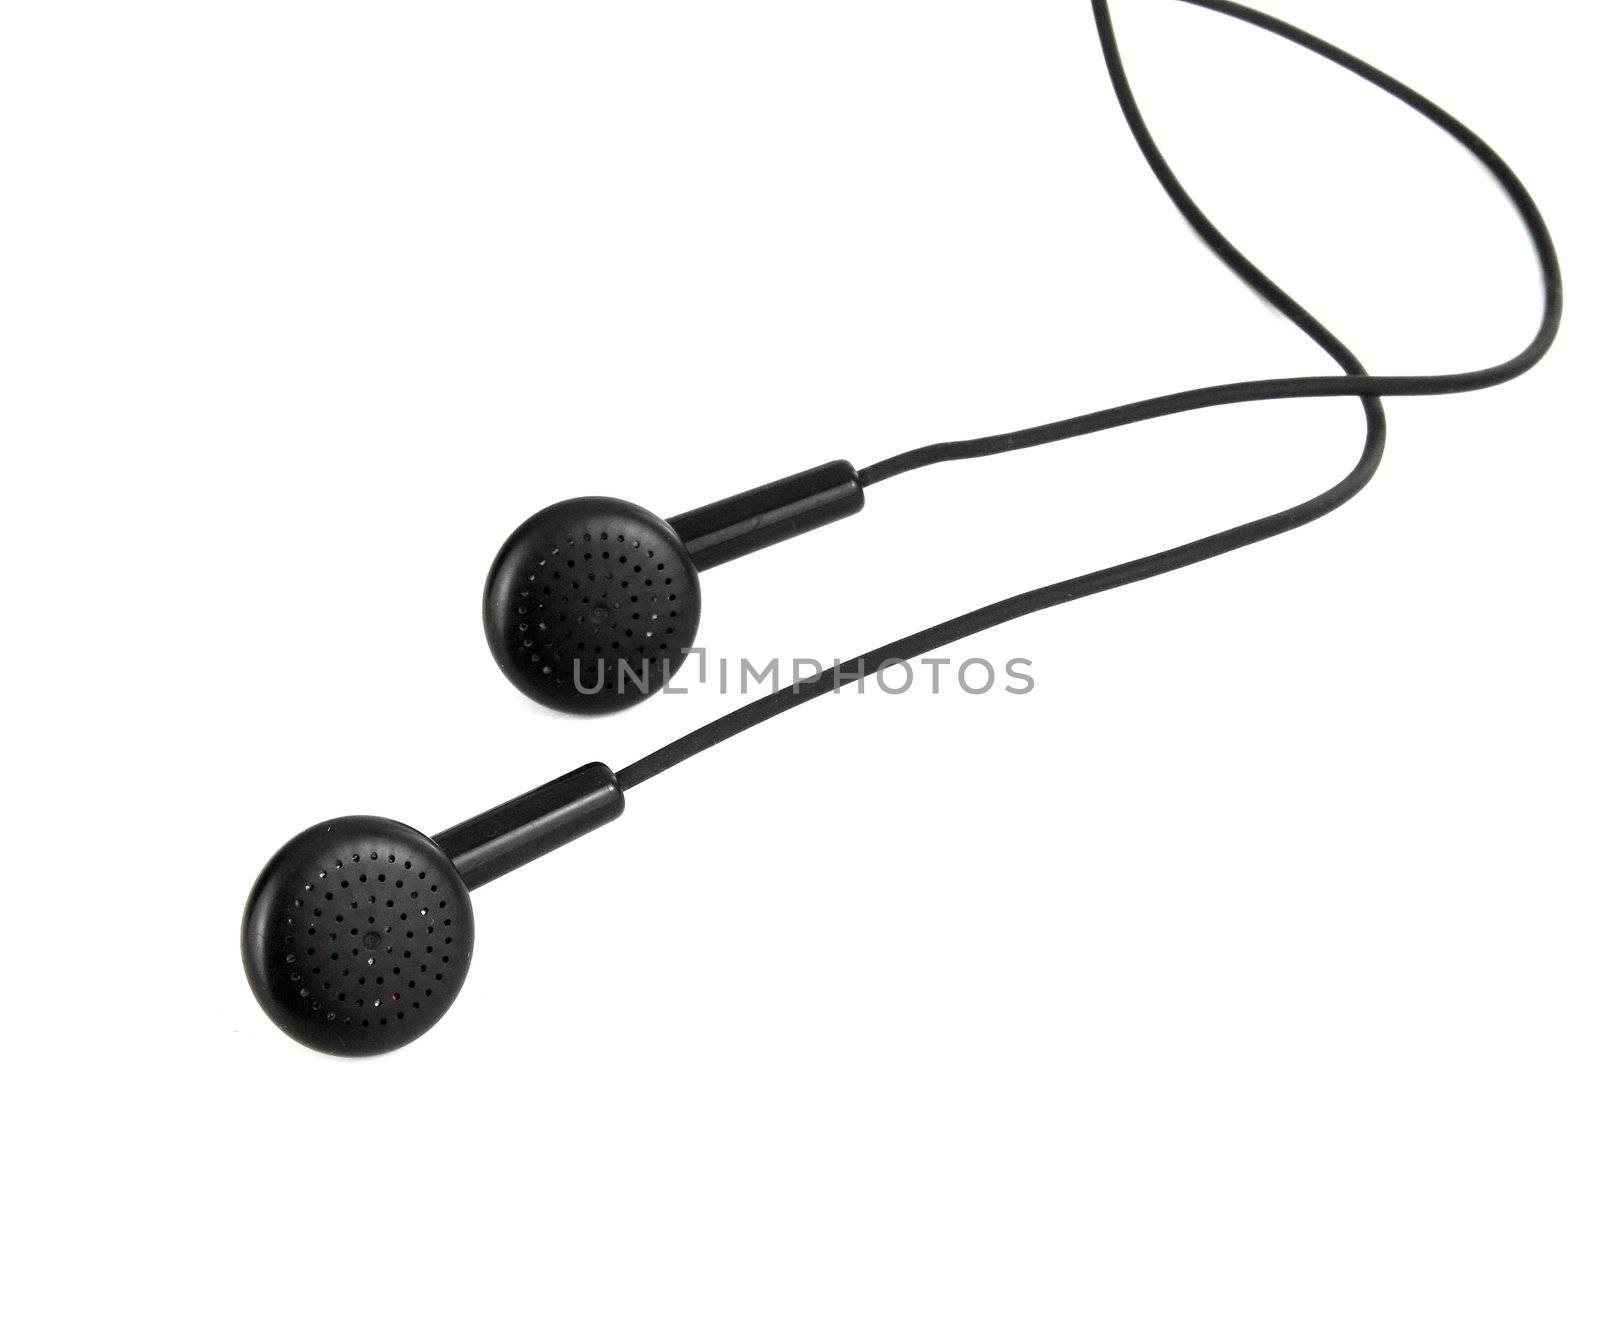 Modern portable audio earphones, isolated on a white background by geargodz